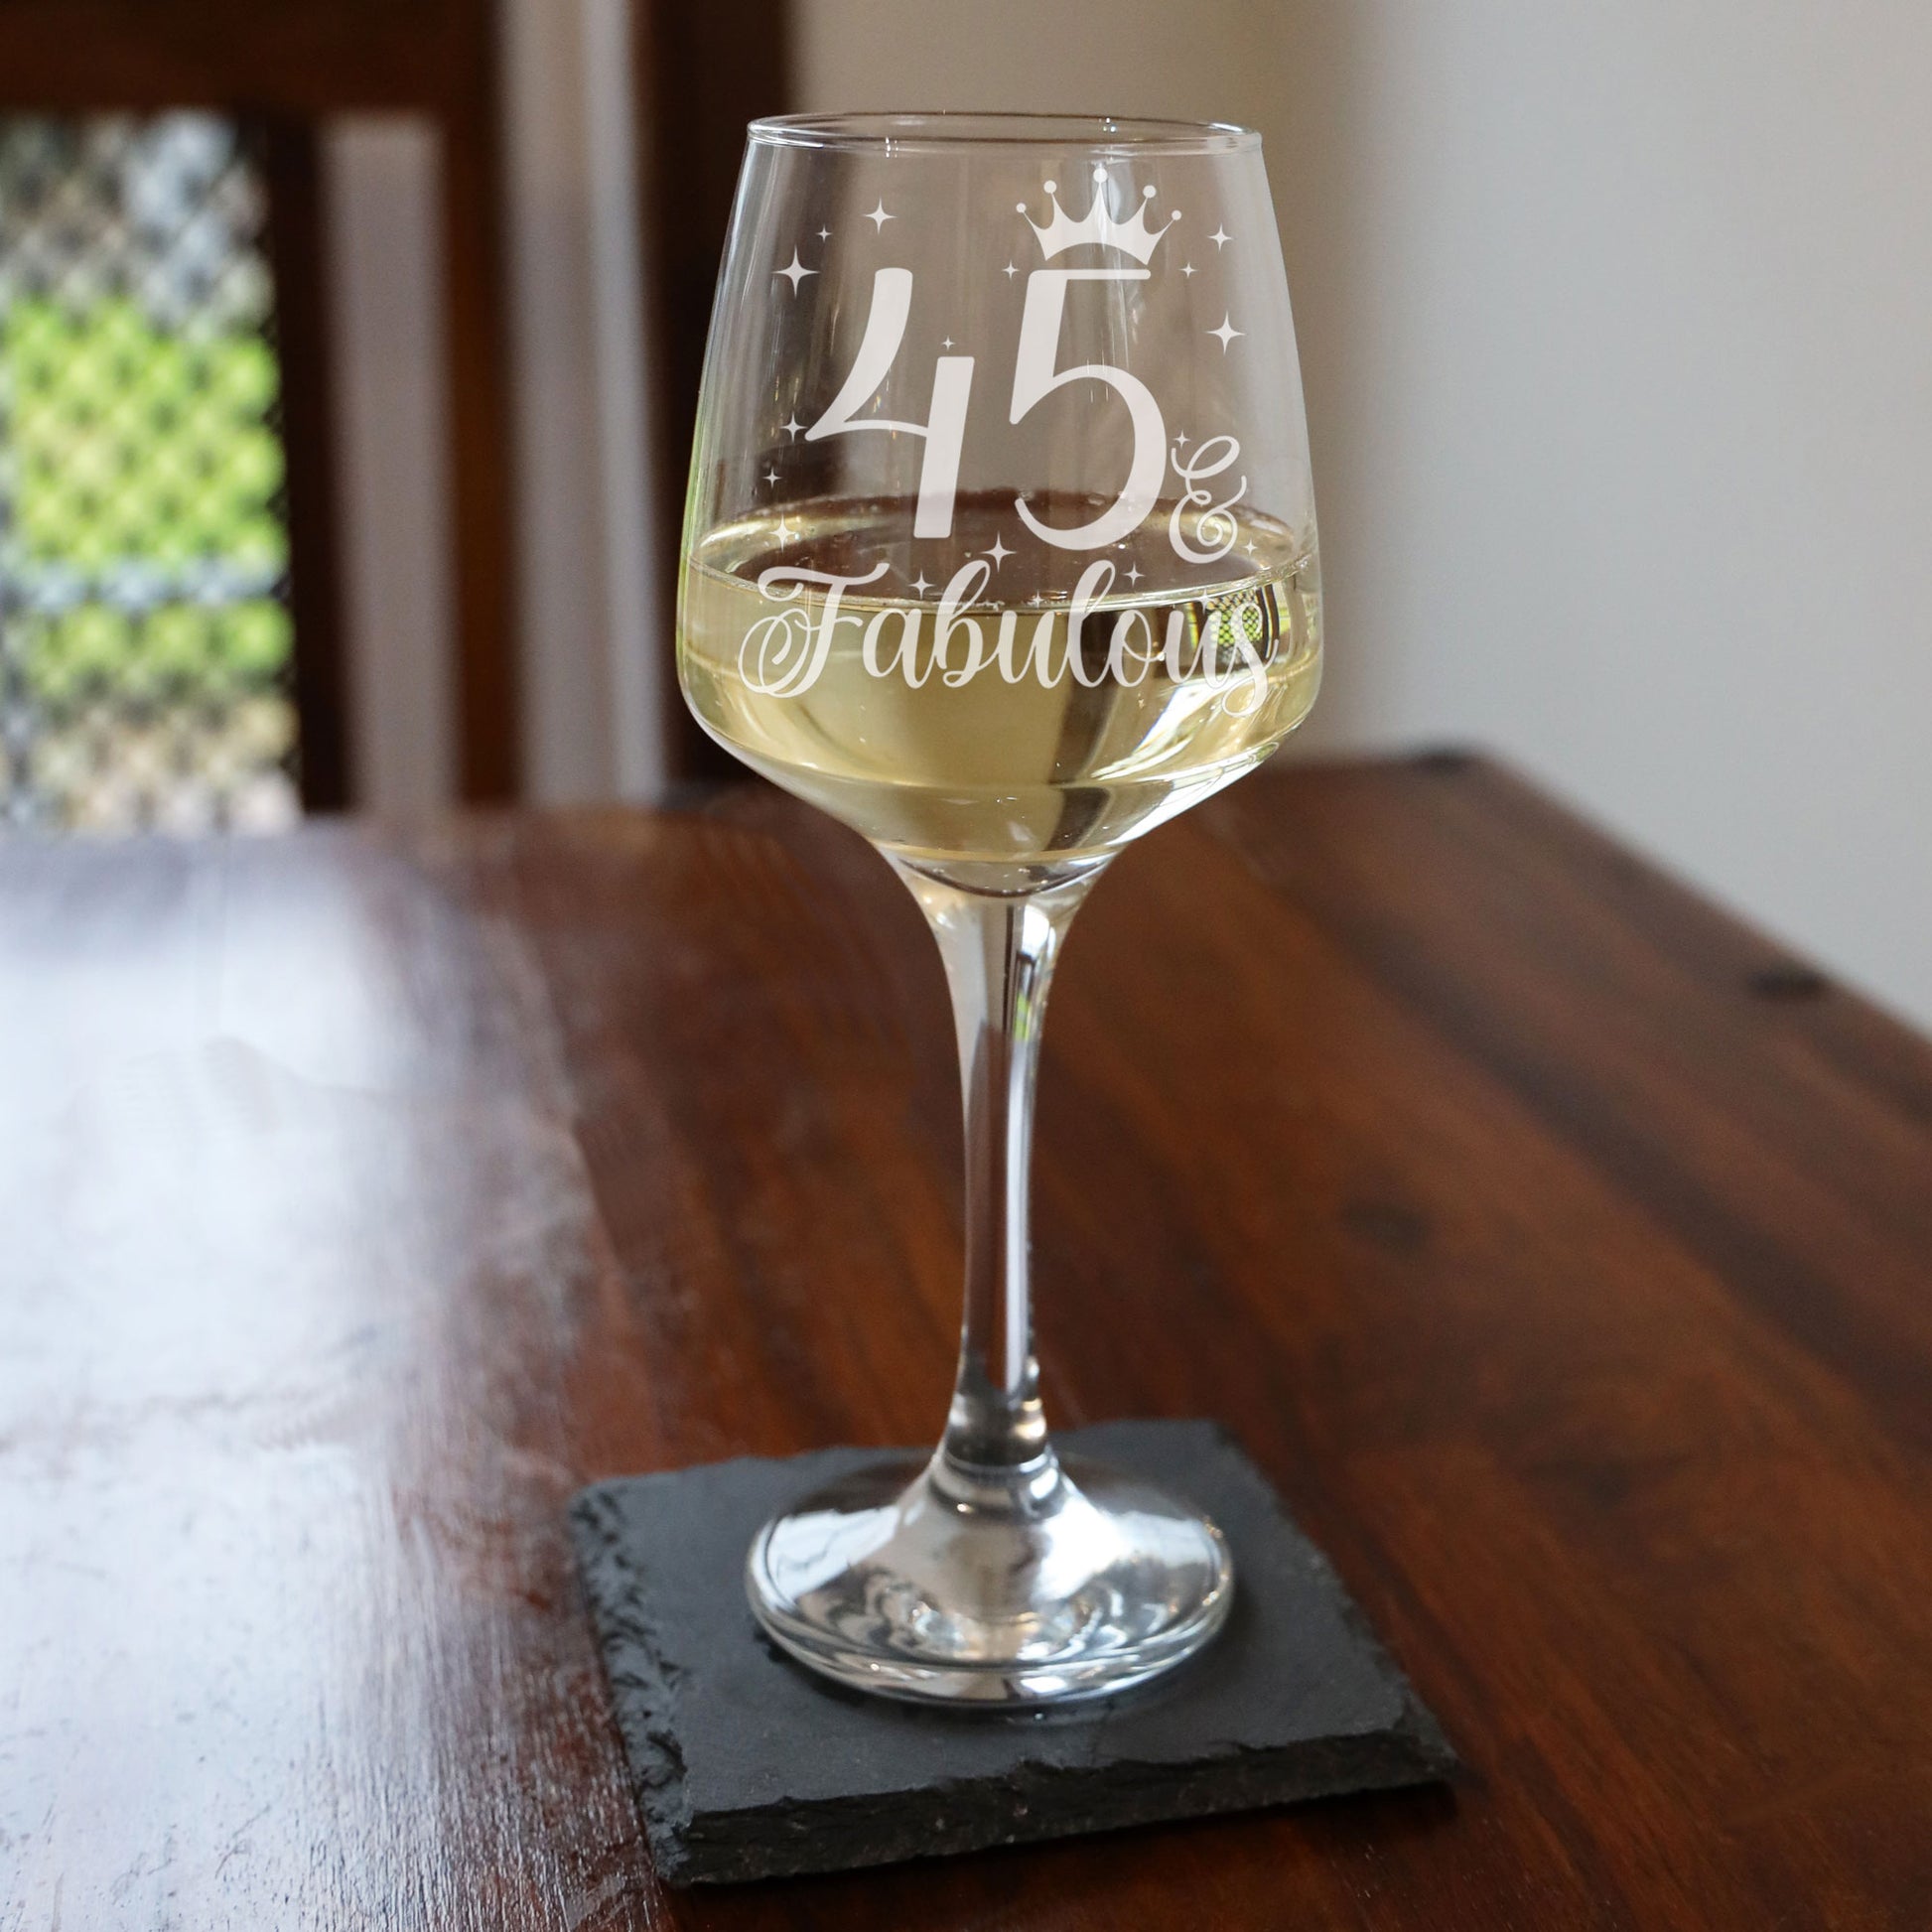 45 & Fabulous 45th Birthday Gift Engraved Wine Glass and/or Coaster Set  - Always Looking Good - Wine Glass Only  